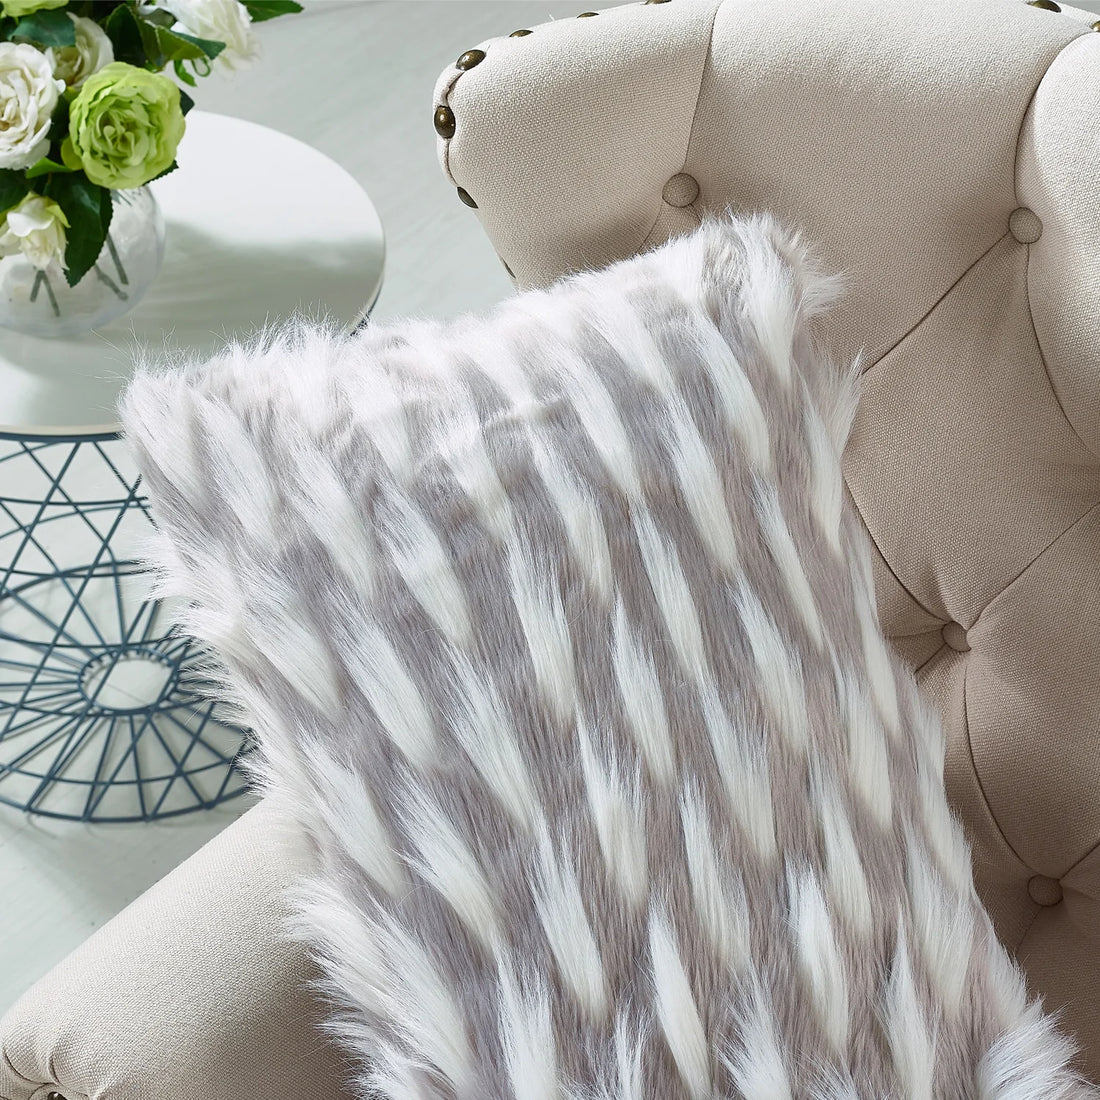 Color, Texture and Symmetry: This Is the Key to Decorating With Throw Pillows